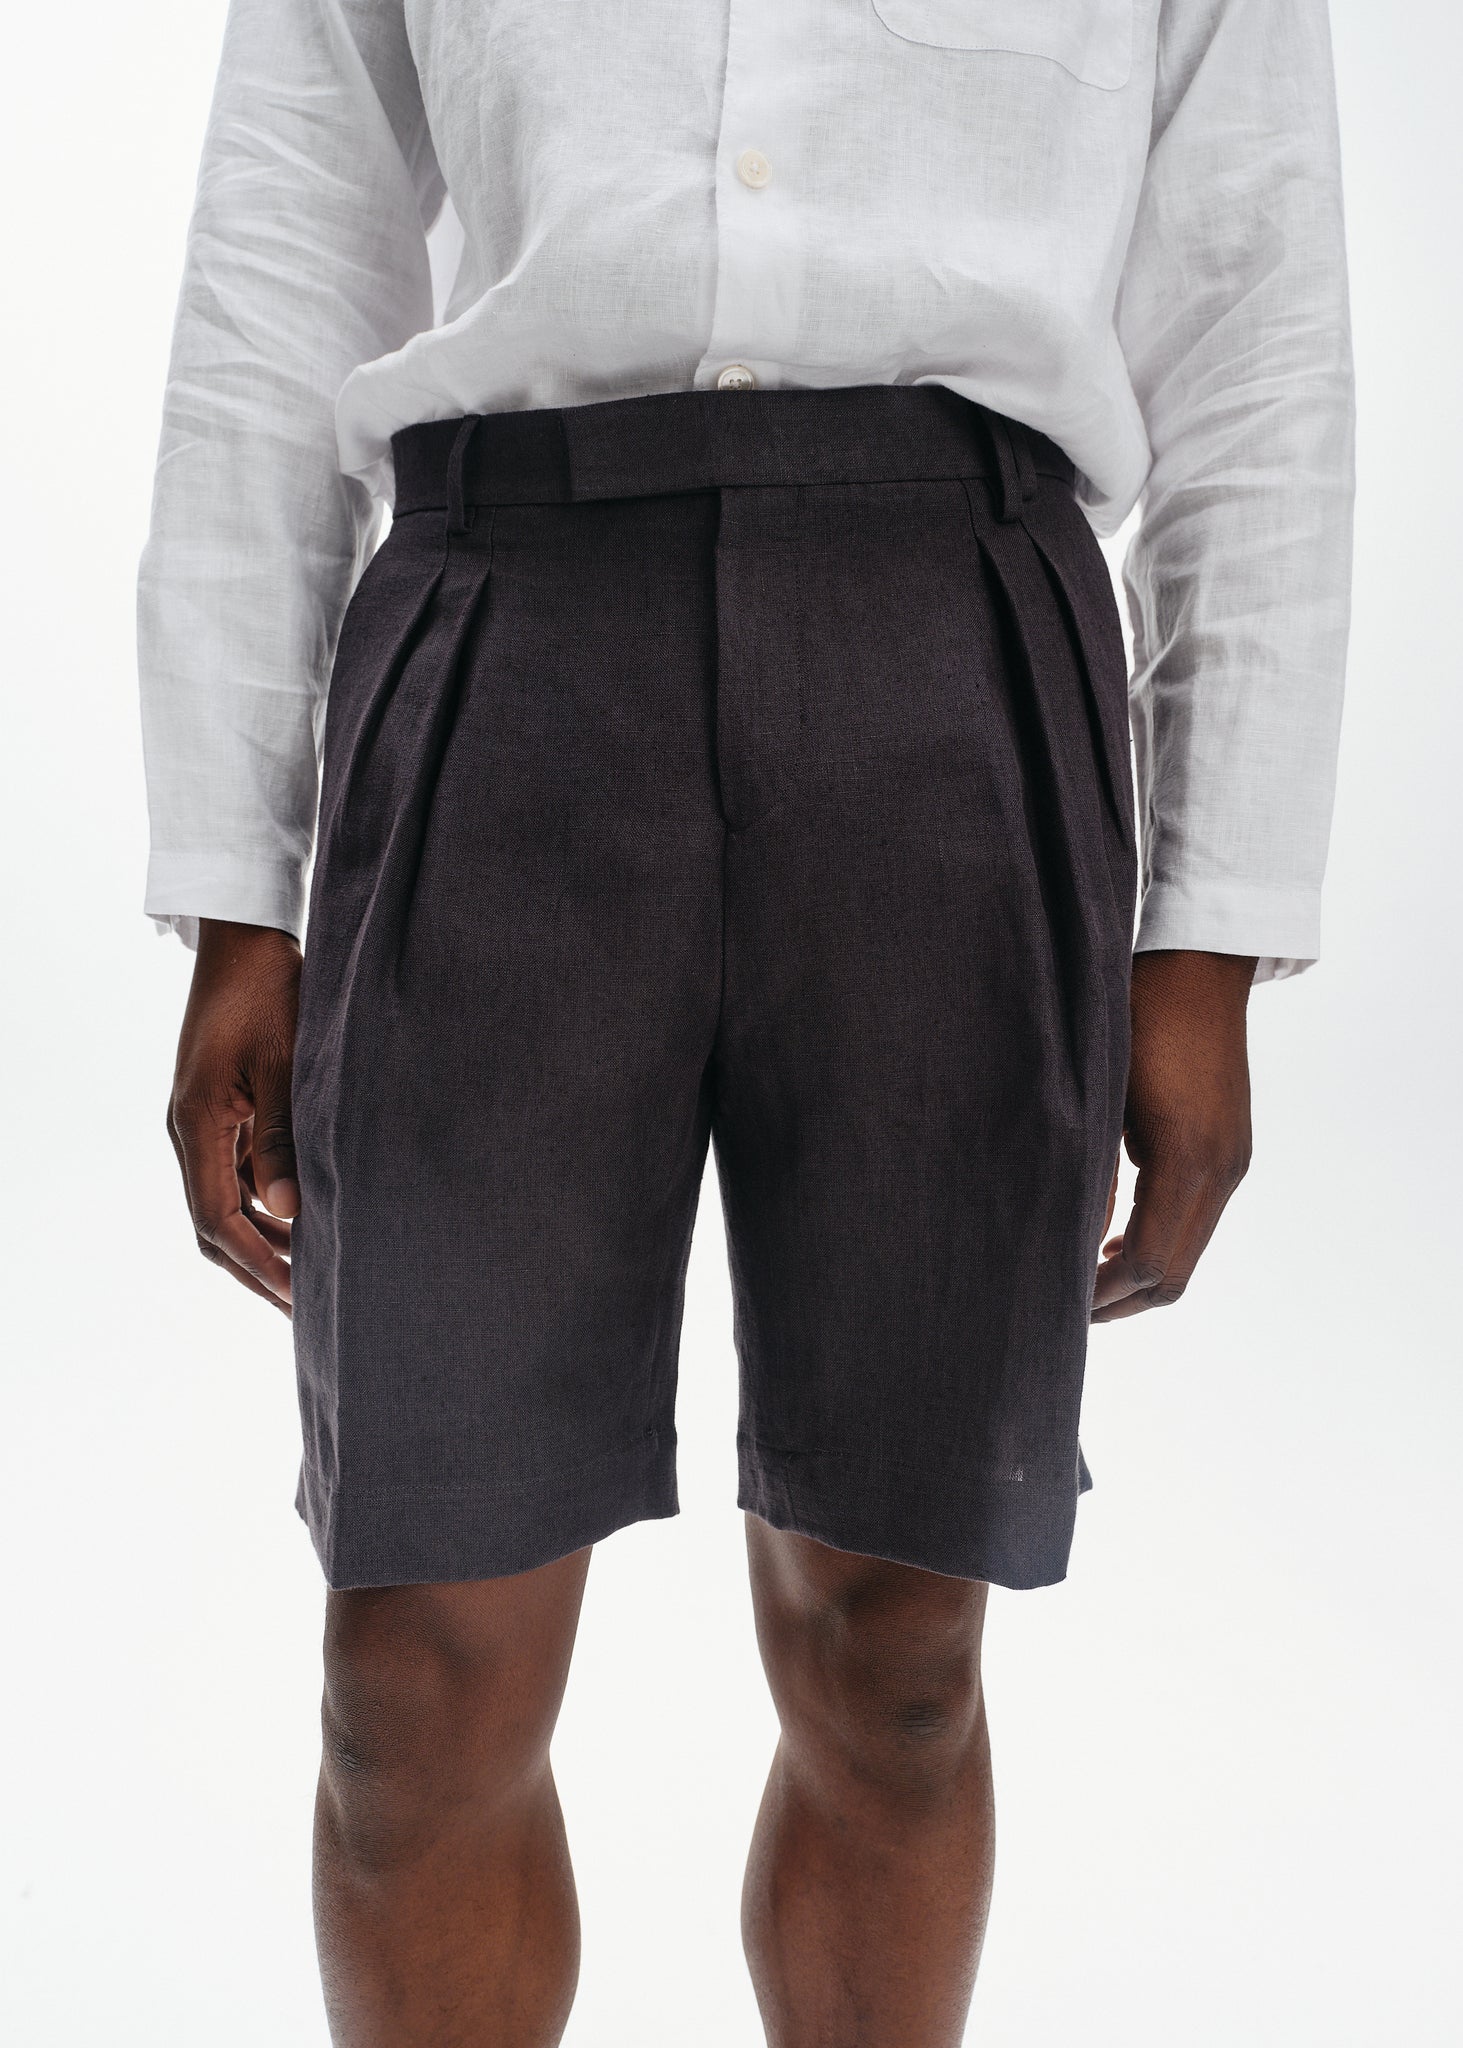 Teal grey linen tailored shorts